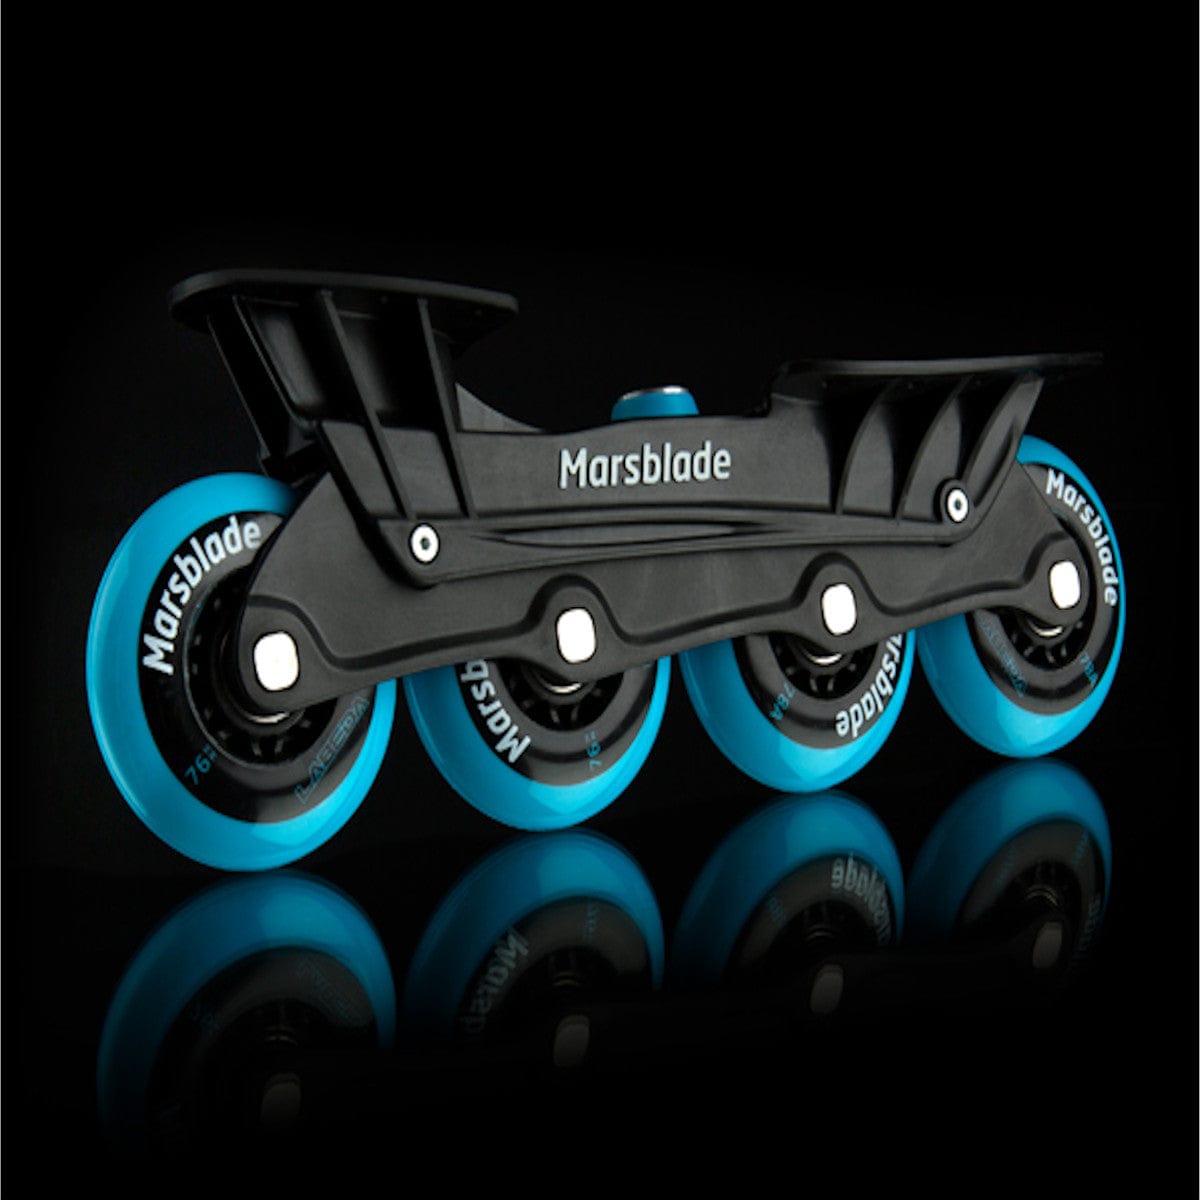 Marsblade Junior Frame Kit Includes Chassis Bearings Wheels For Inline And Roller Training Side View Black Background